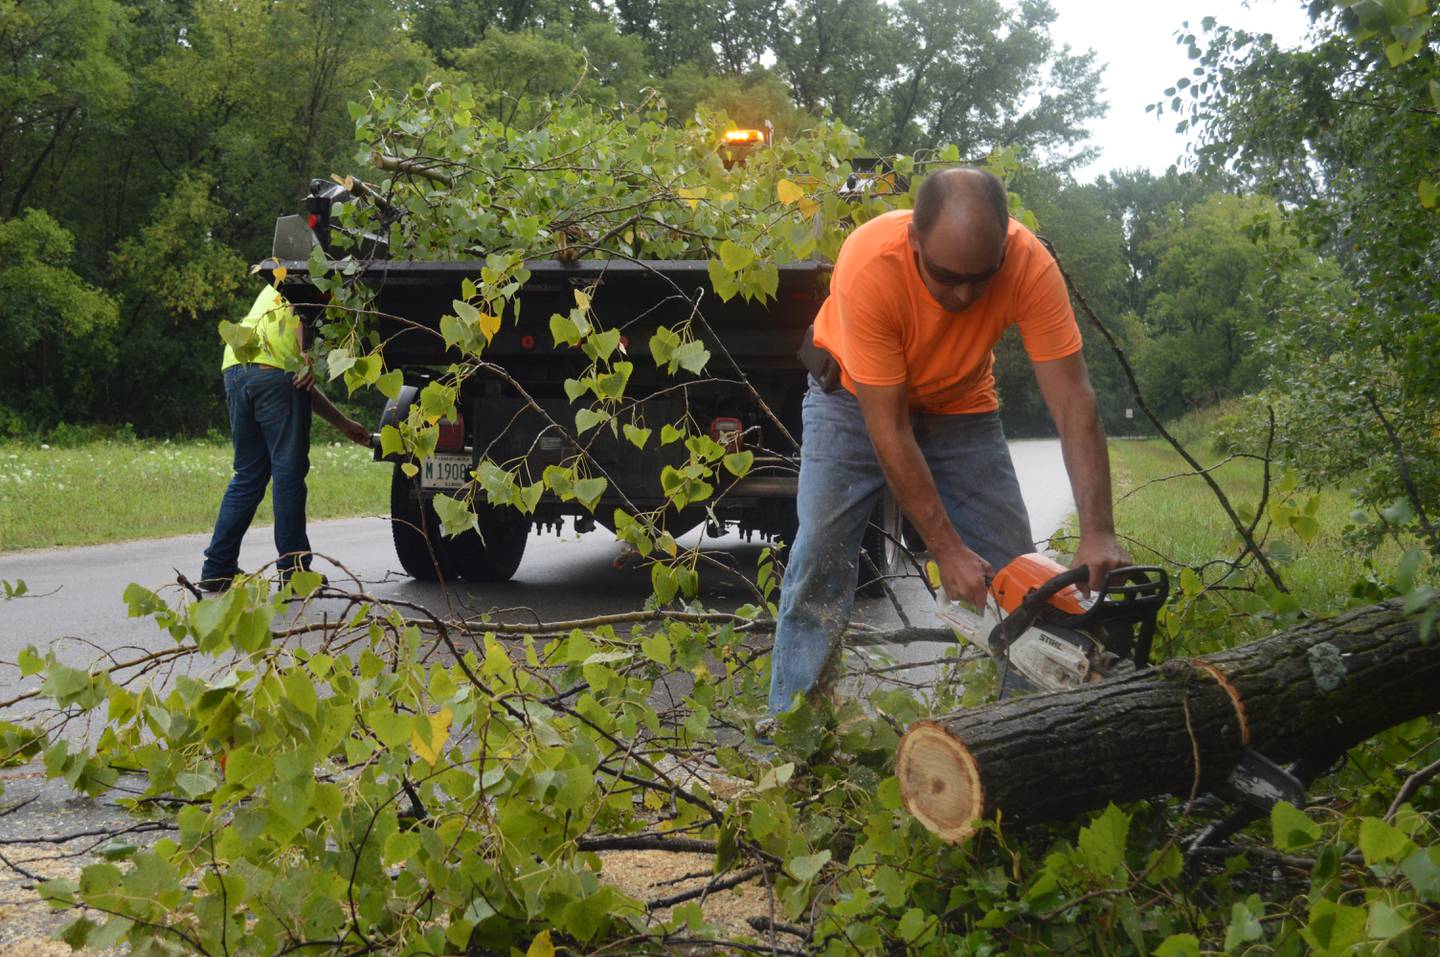 Dave Walsh of the village of Johnsburg's public works department saws through a tree Wednesday, Aug. 11, 2021 to remove it from across Reed Avenue. This week's storms brought high winds and several tornadoes to northern Illinois, including one that touched down Monday evening in McHenry.